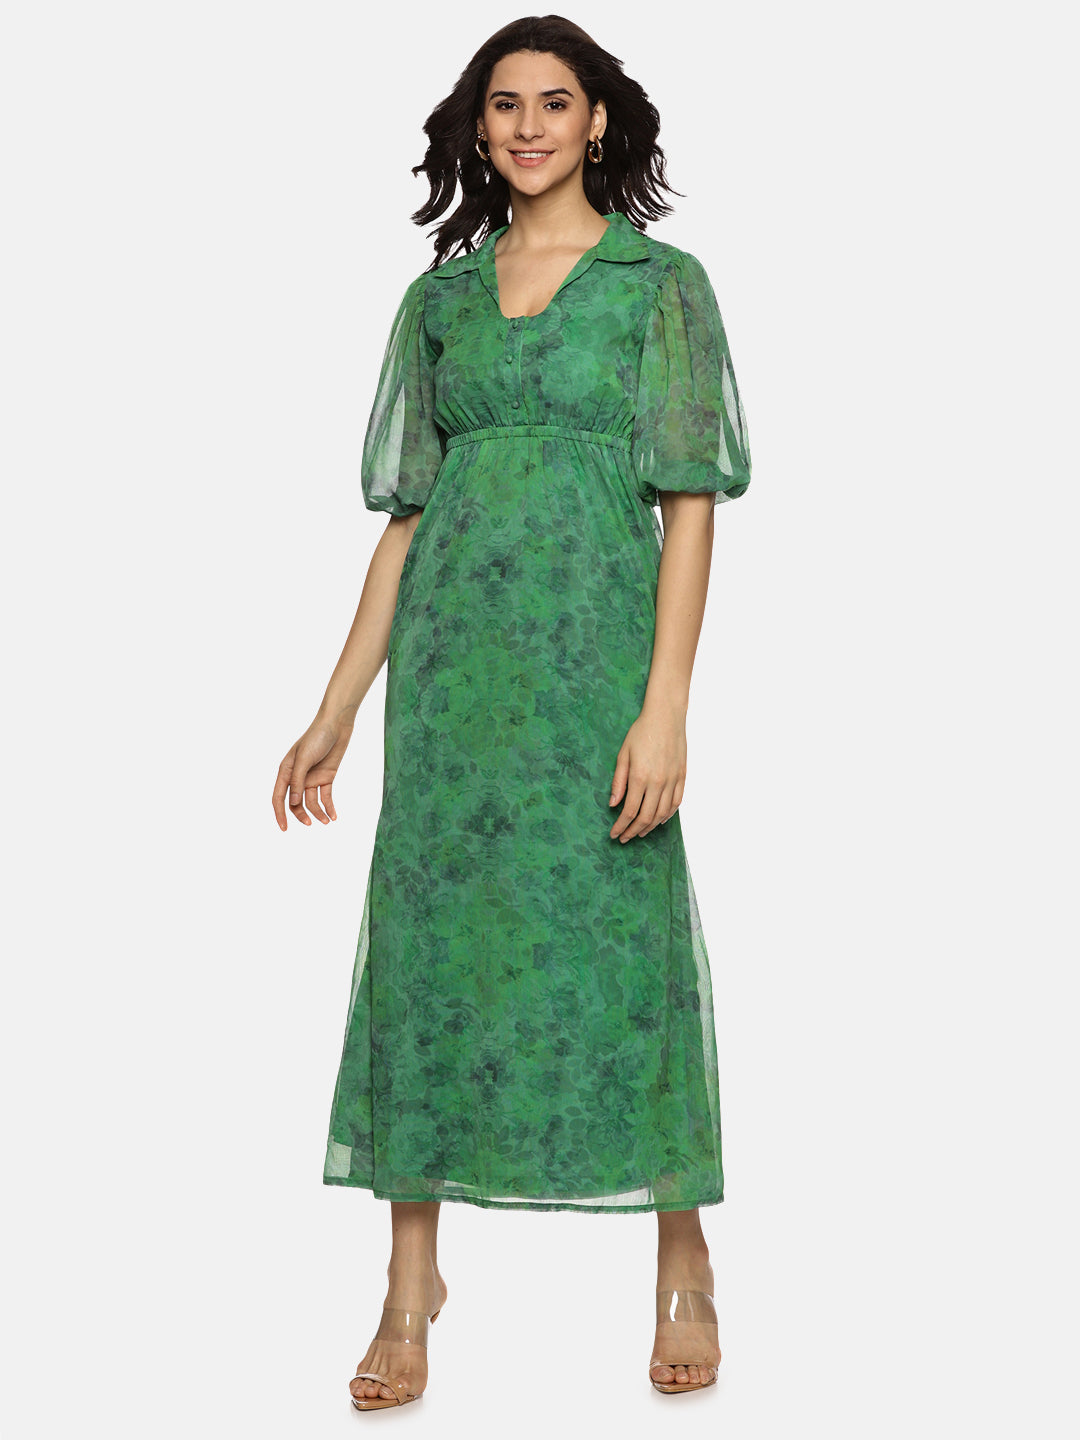 Buy Green Printed Floral Chiffon Fabric | Shirt Collared Maxi Dress Online In India